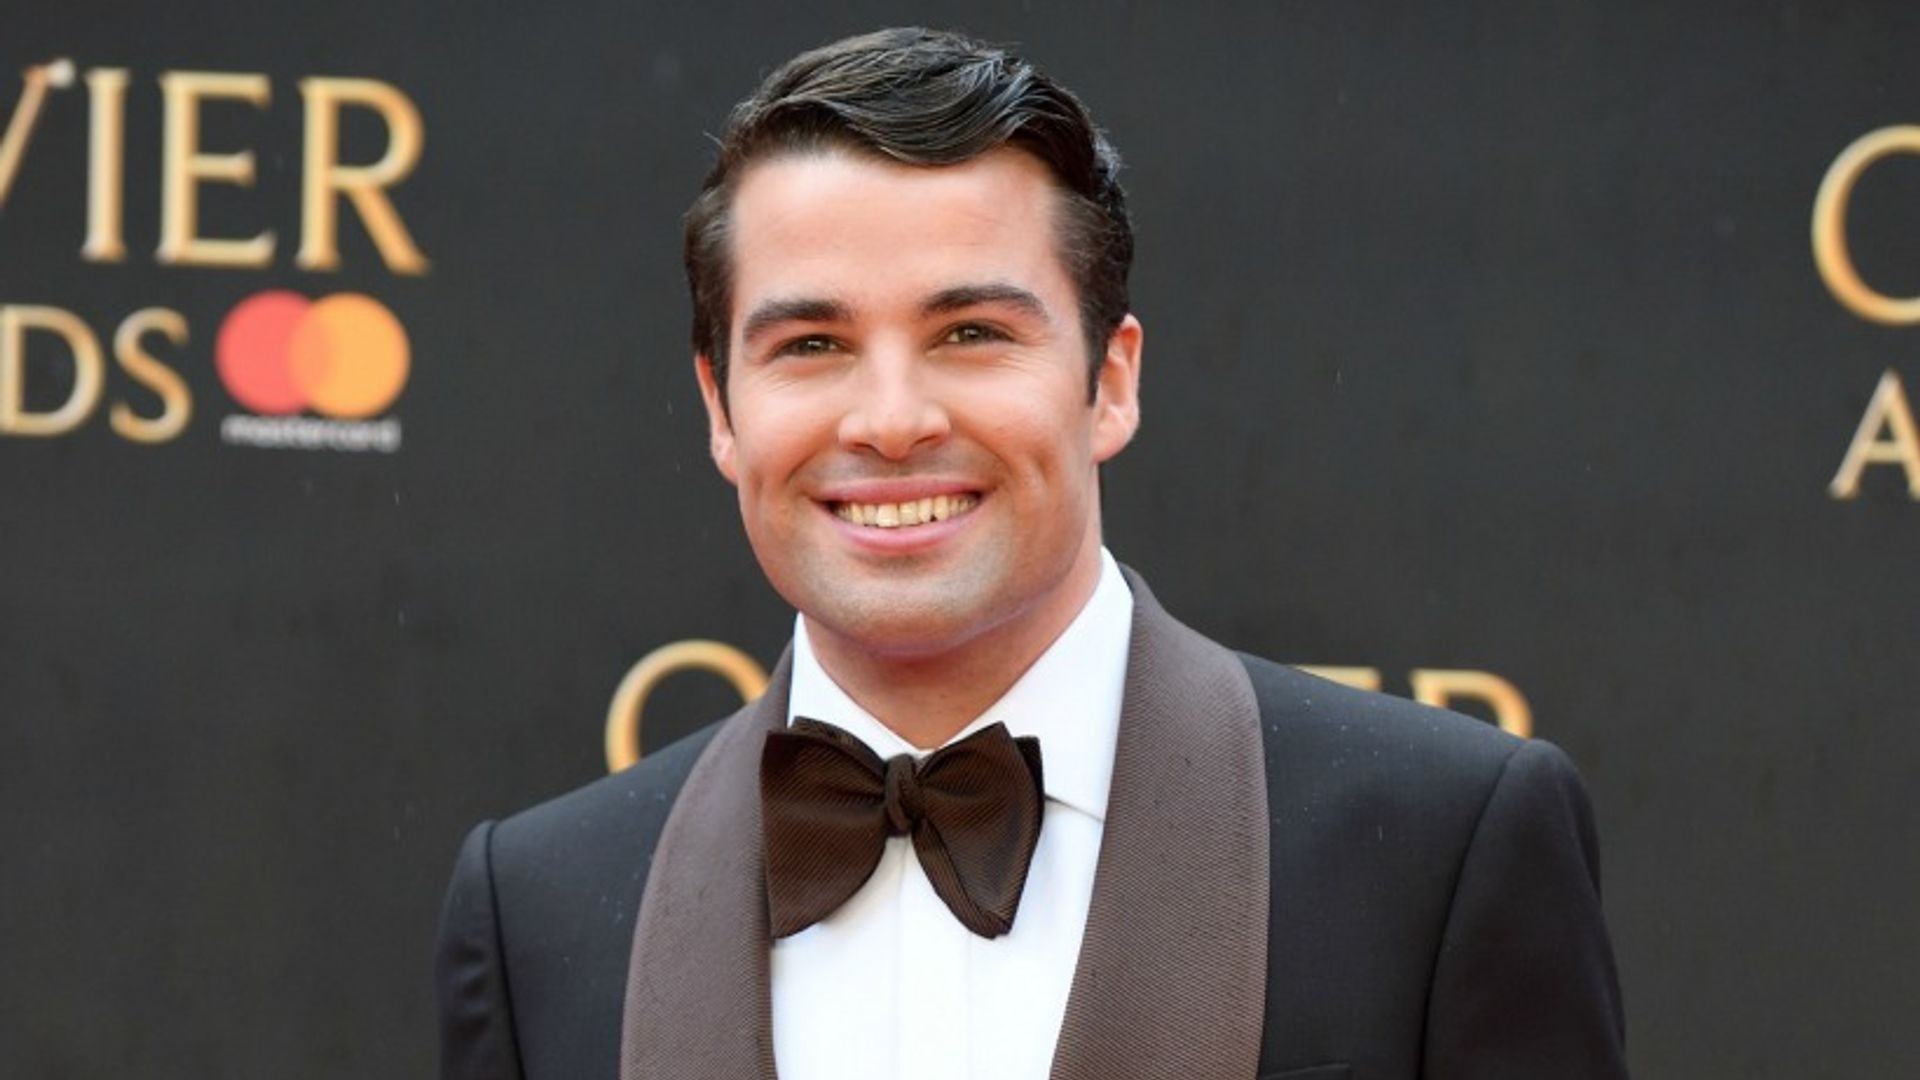 Joe McElderry shocks fans with his latest transformation